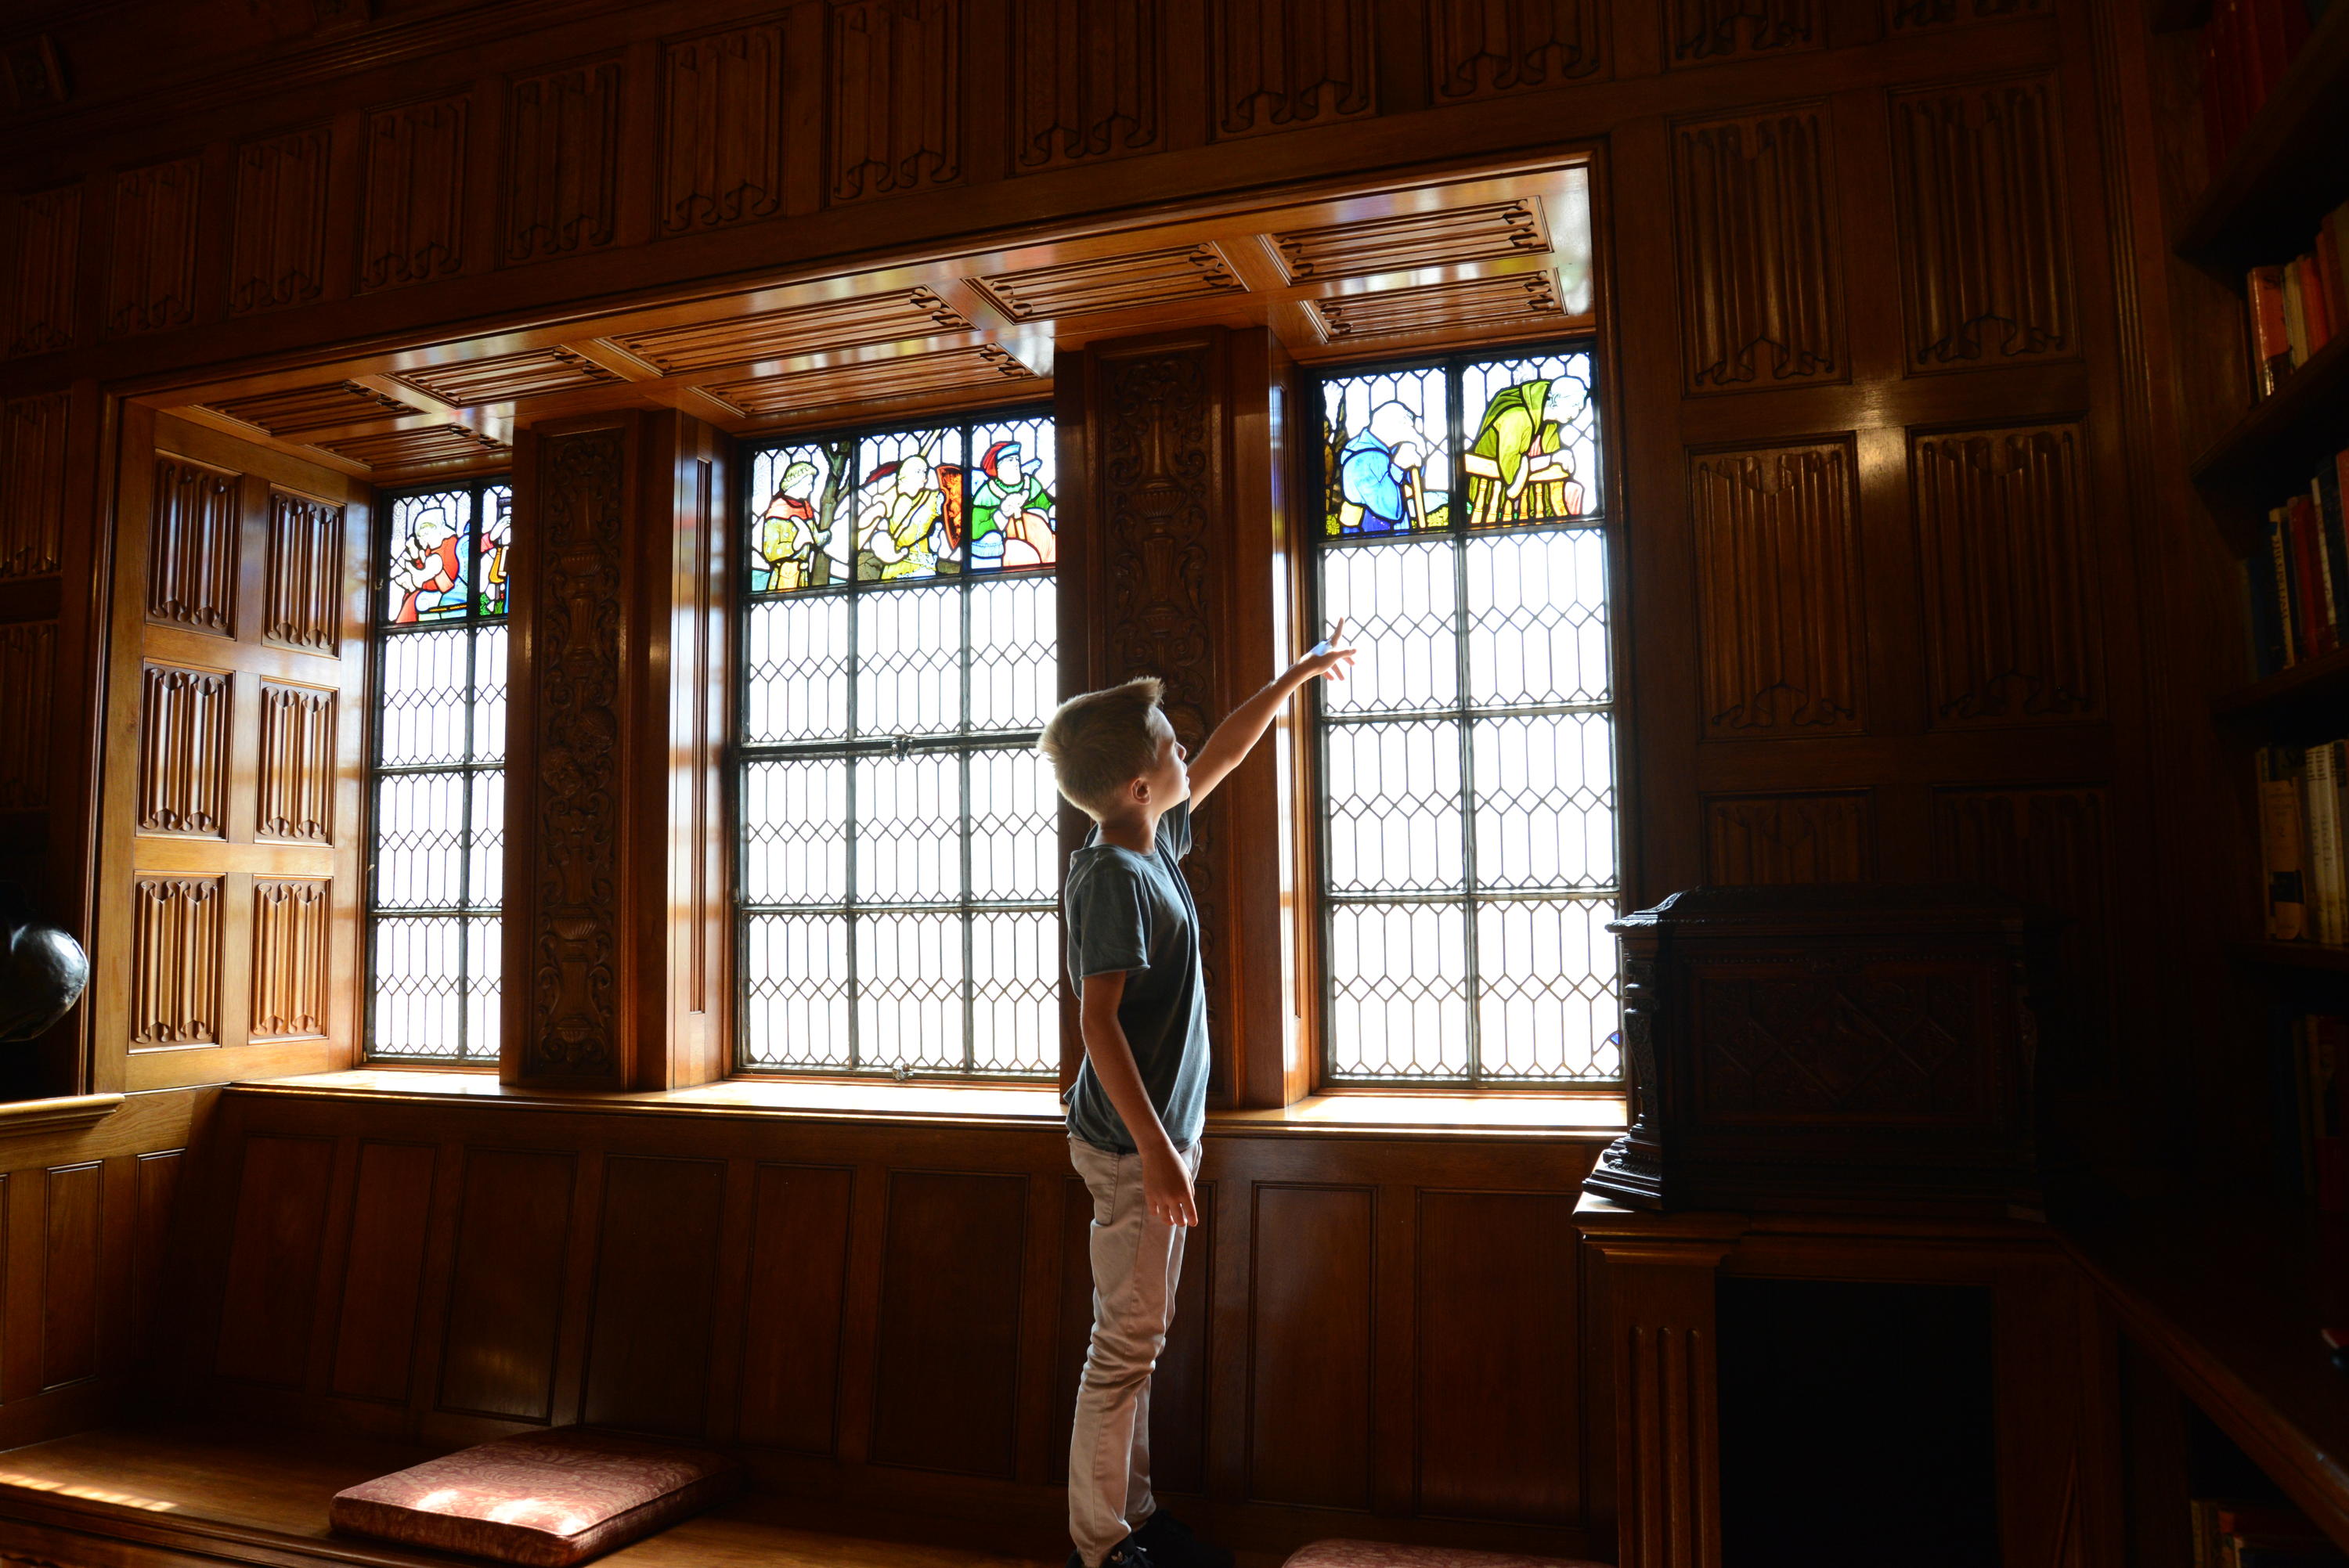 A child looking through the stained glass windows in the State Library Shakespeare Room